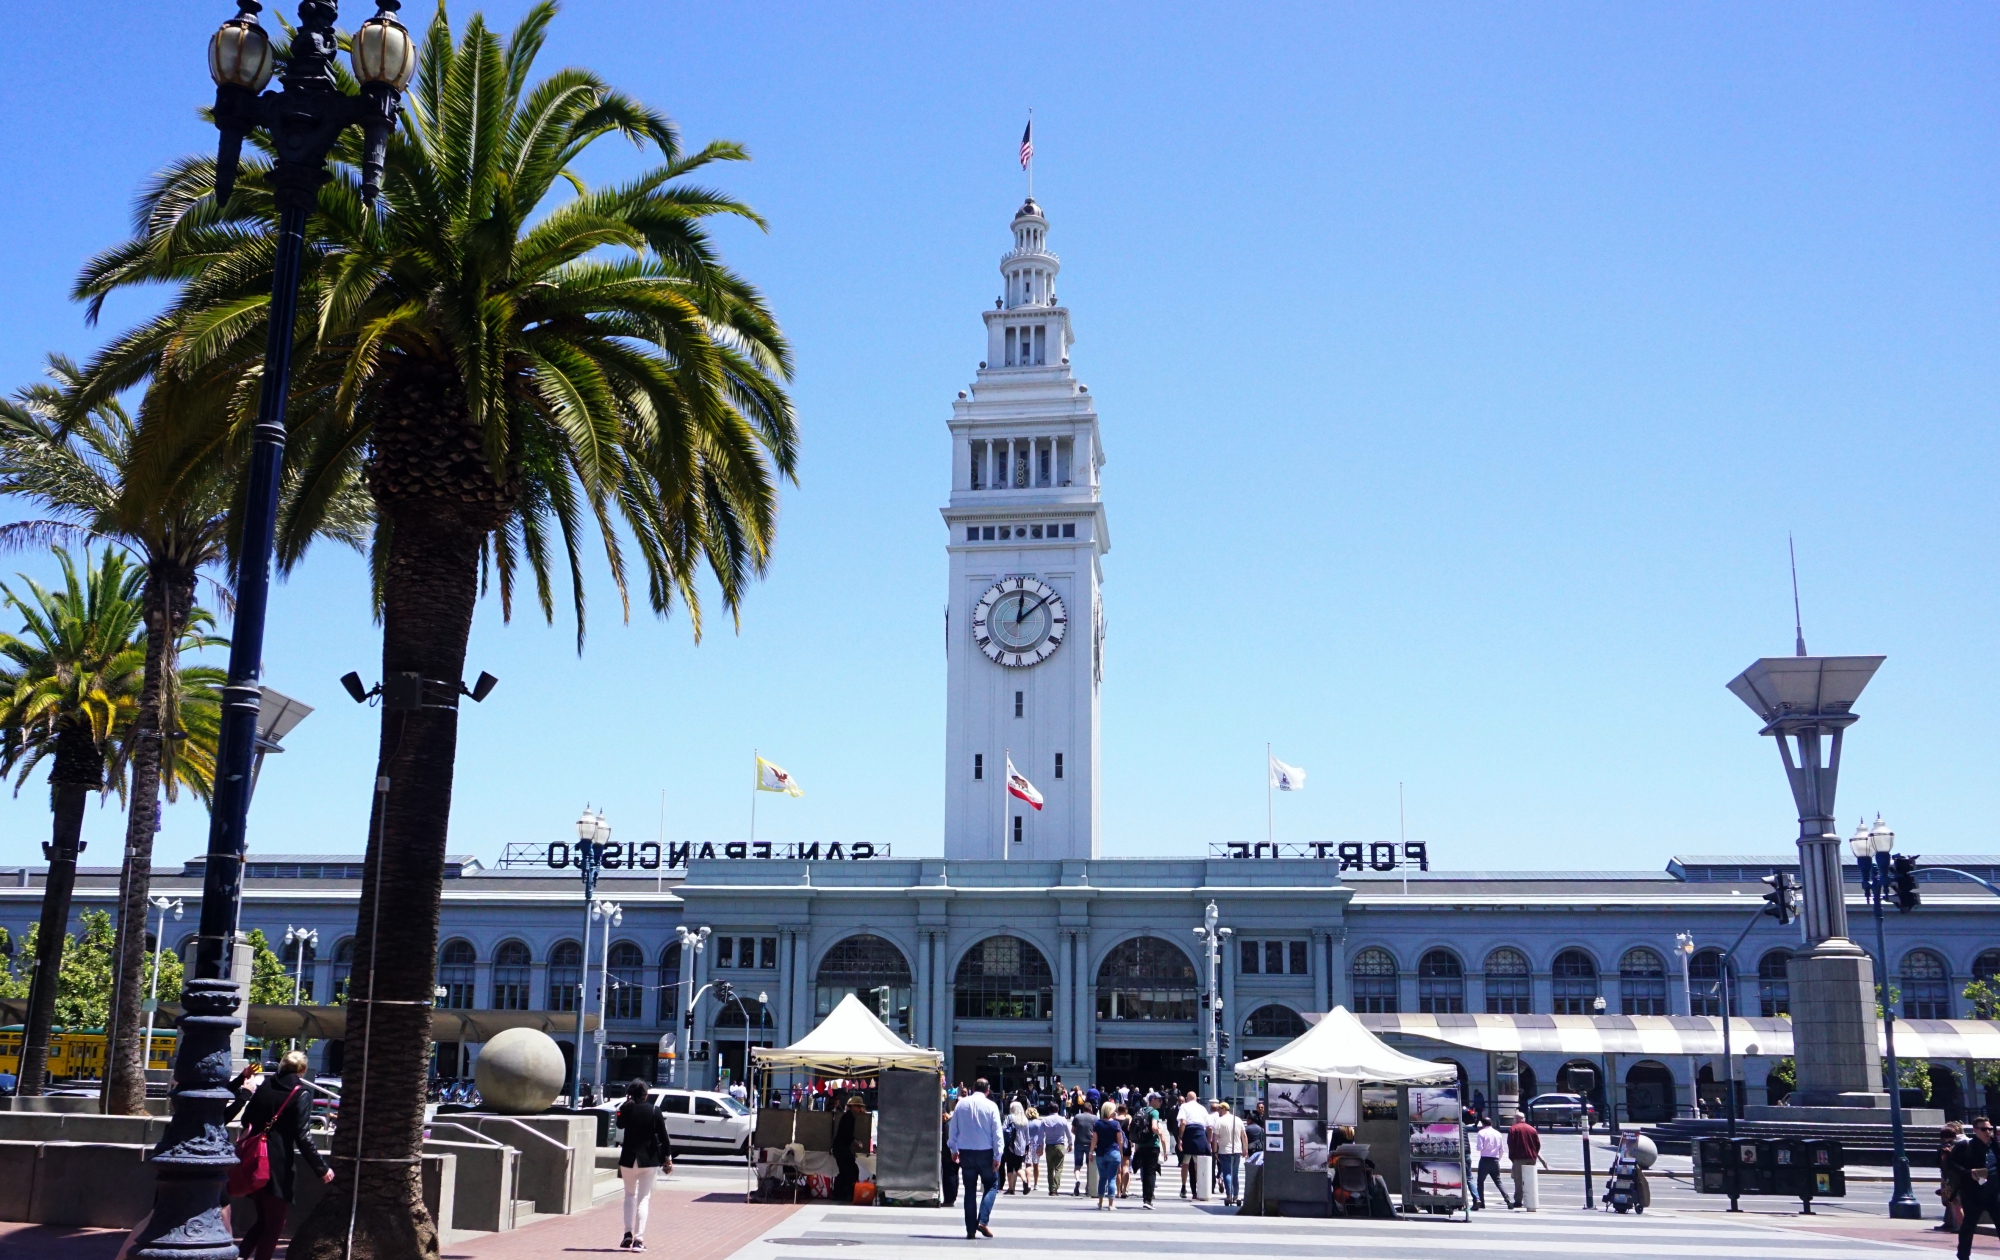 Ferry Building